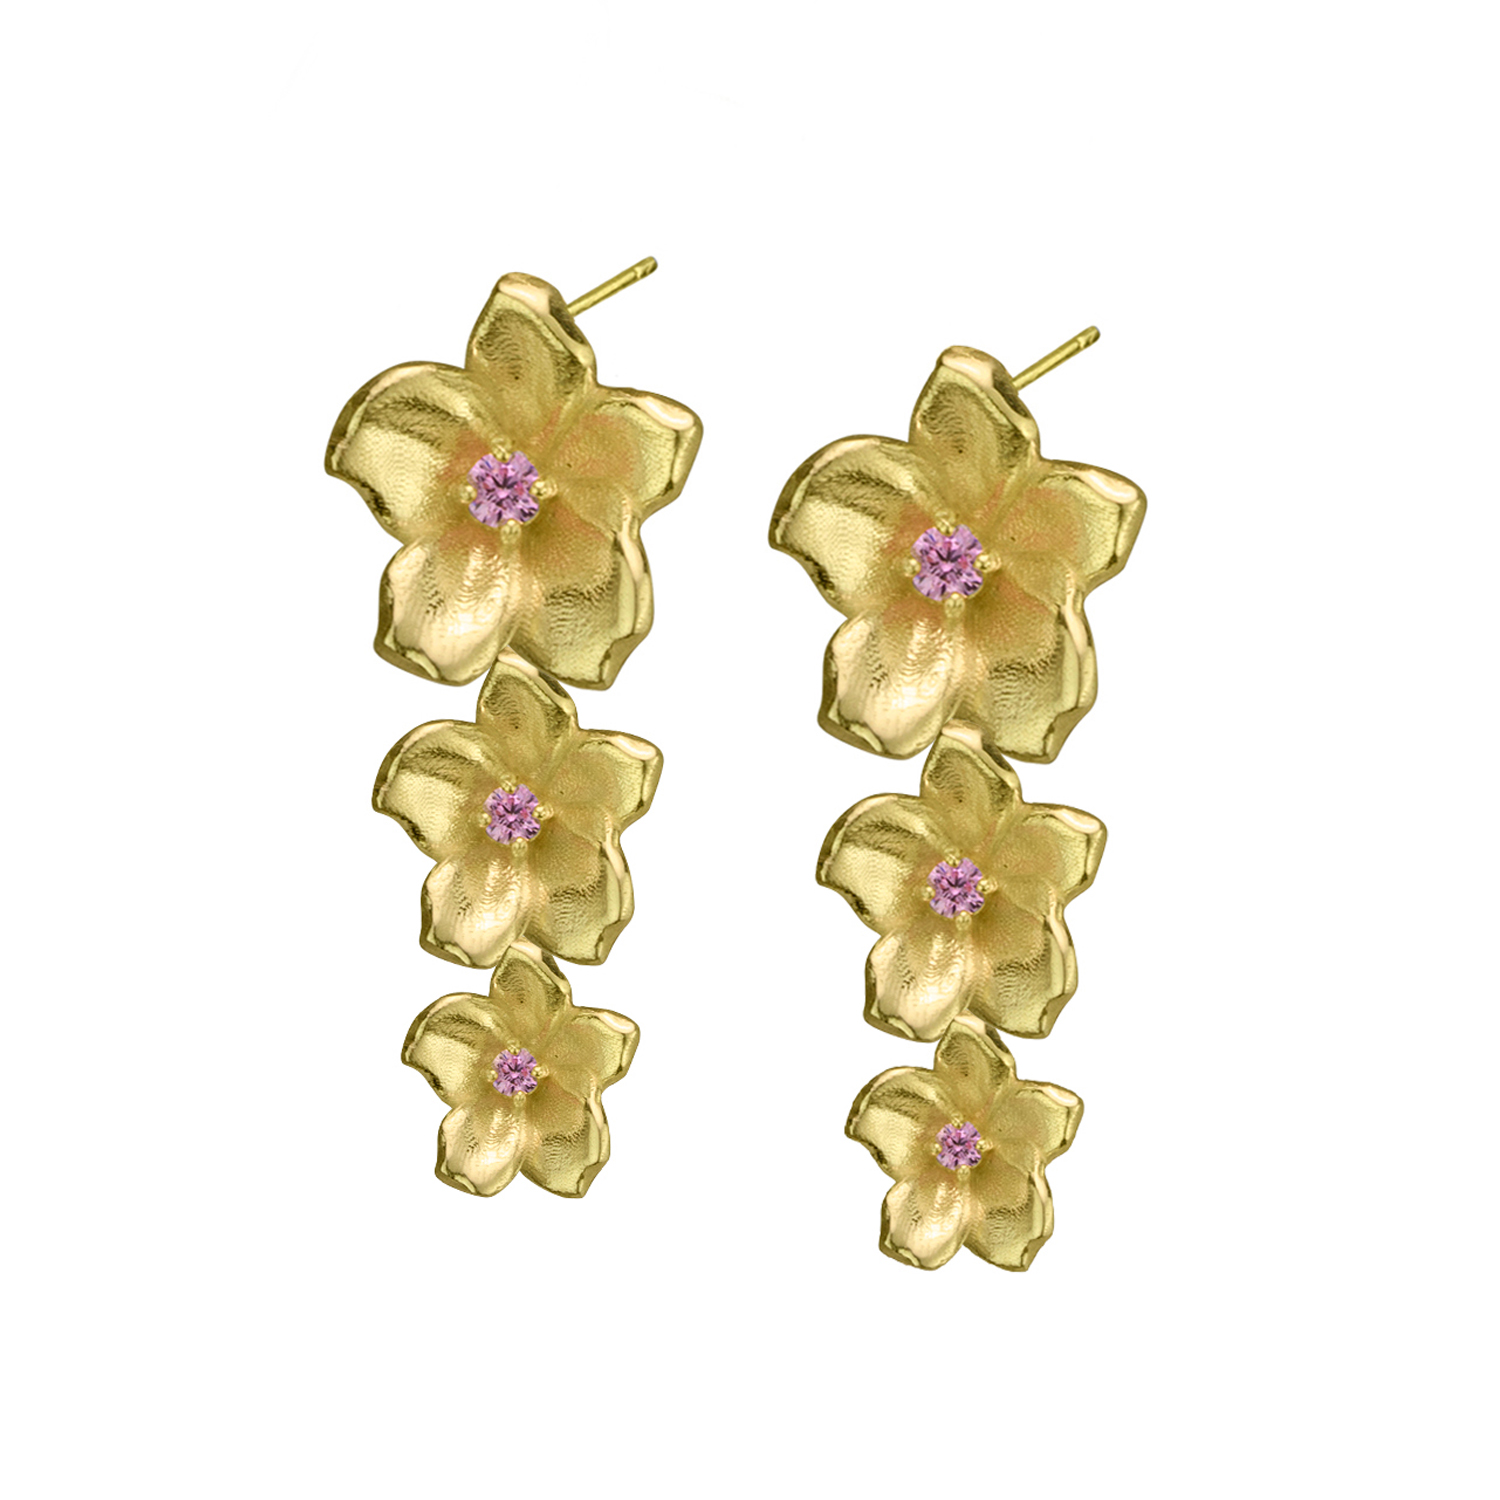 Details 211+ gold earrings canada latest